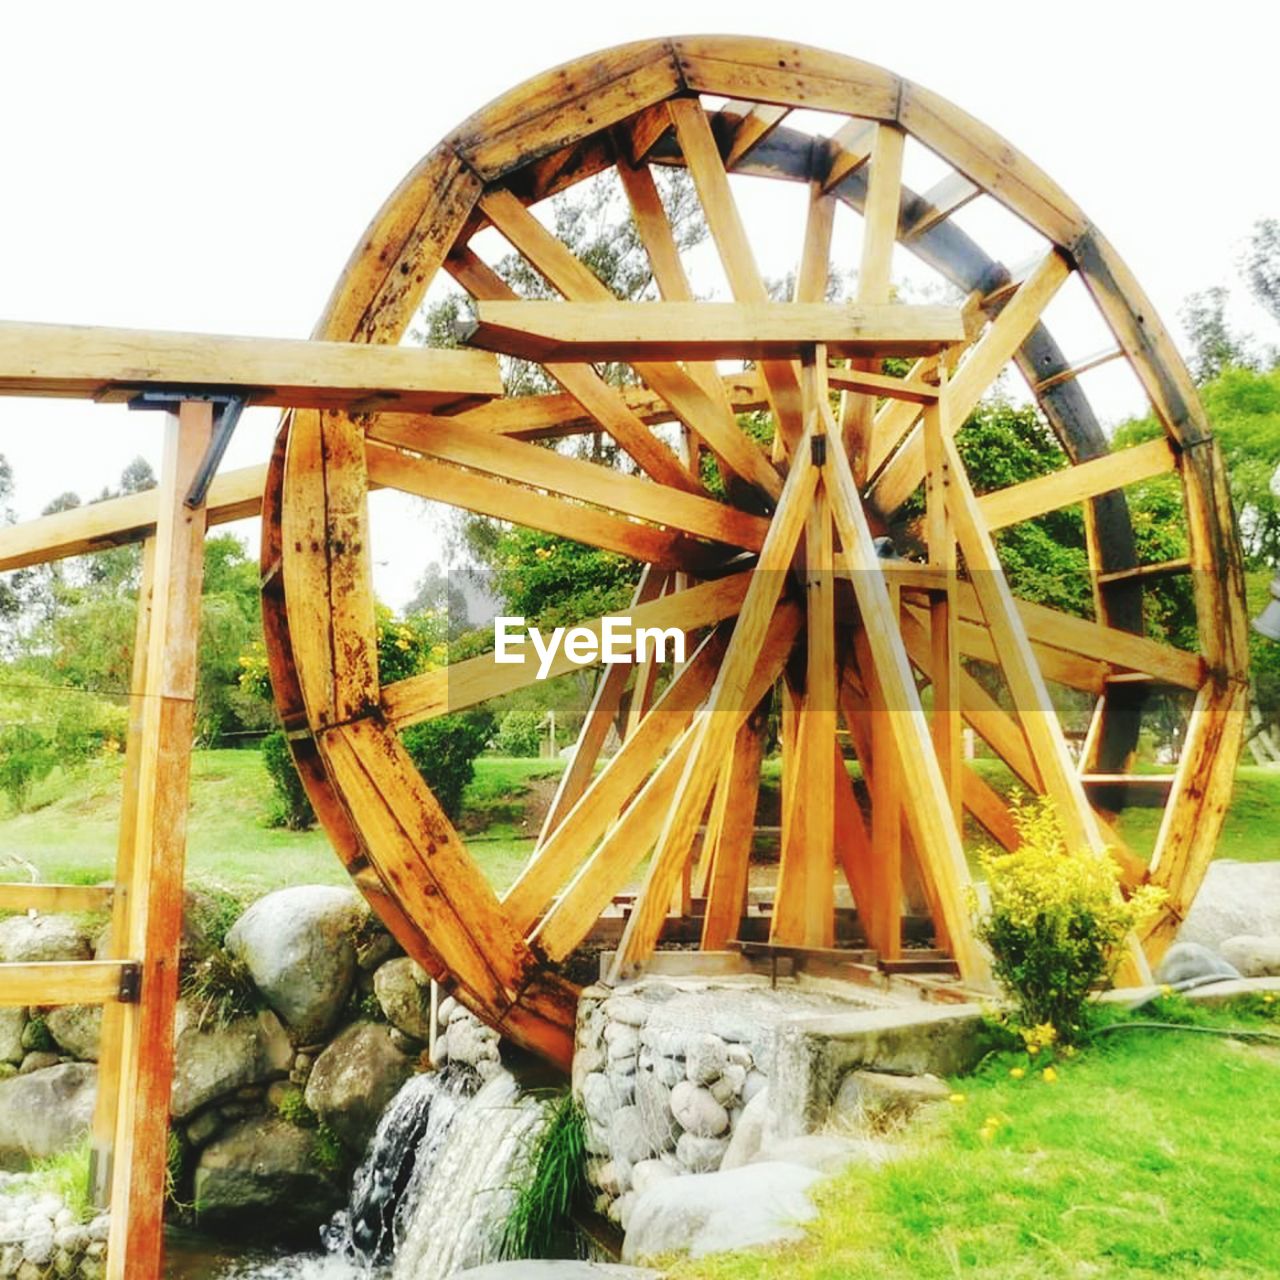 VIEW OF WOODEN STRUCTURE BY RIVER